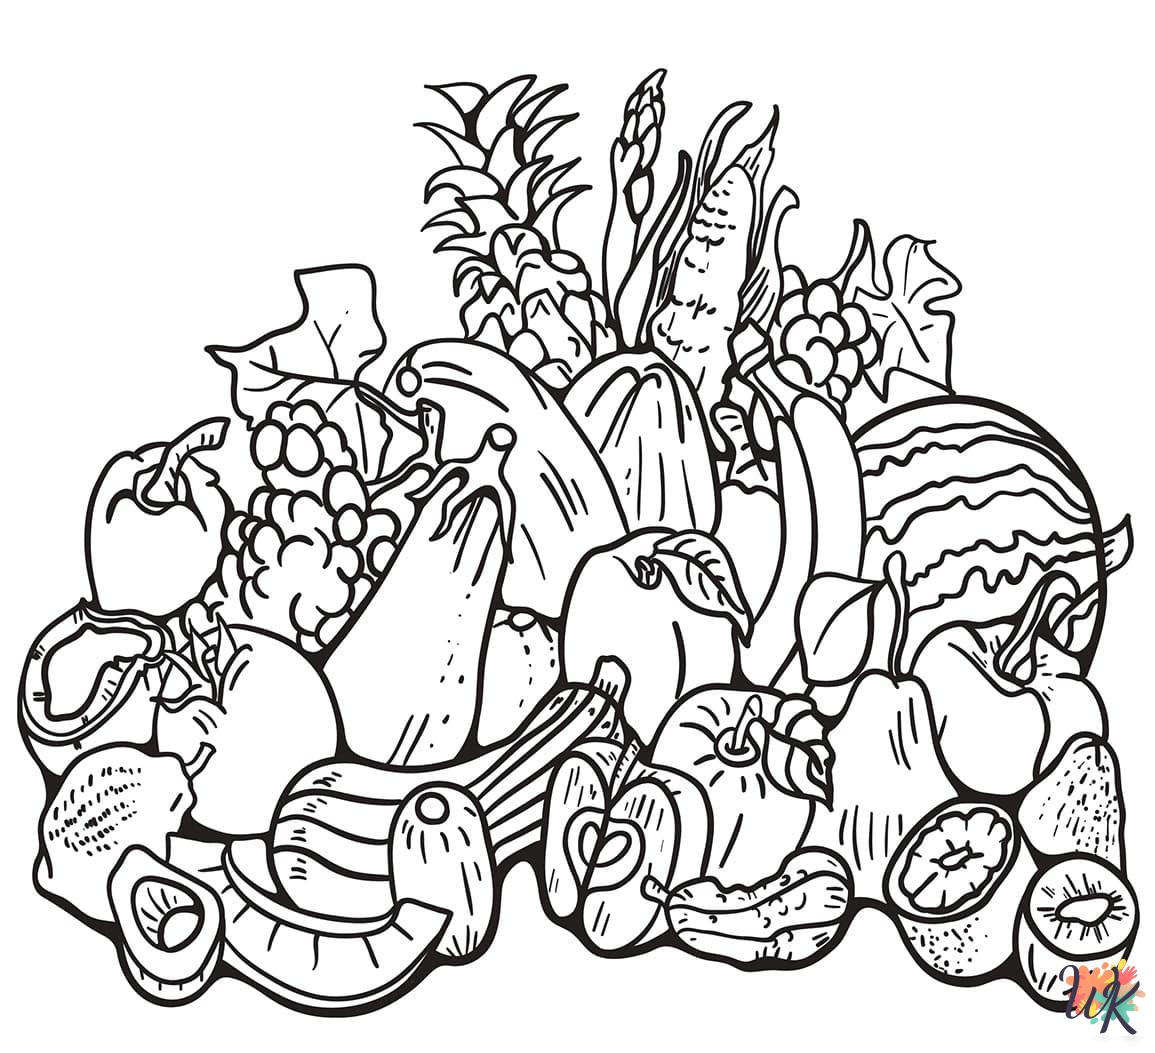 Autumm coloring pages for adults pdf